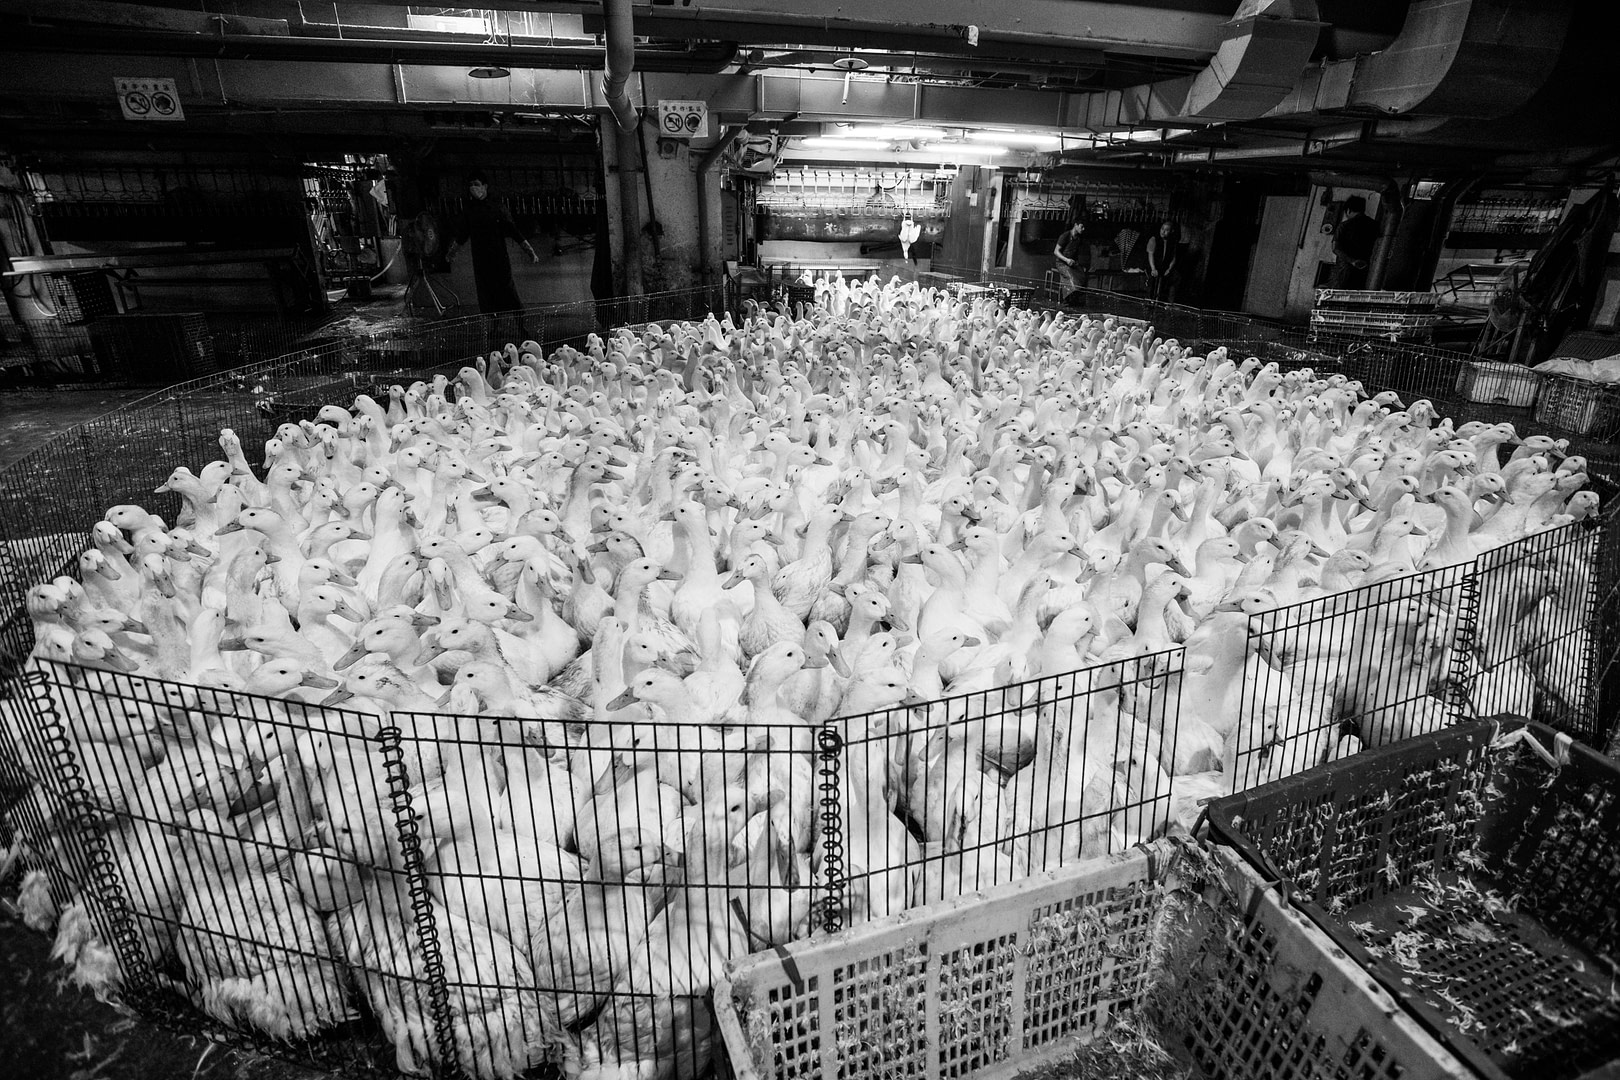 Ducks penned for slaughter. Taiwan, 2019. Jo-Anne McArthur / We Animals Media